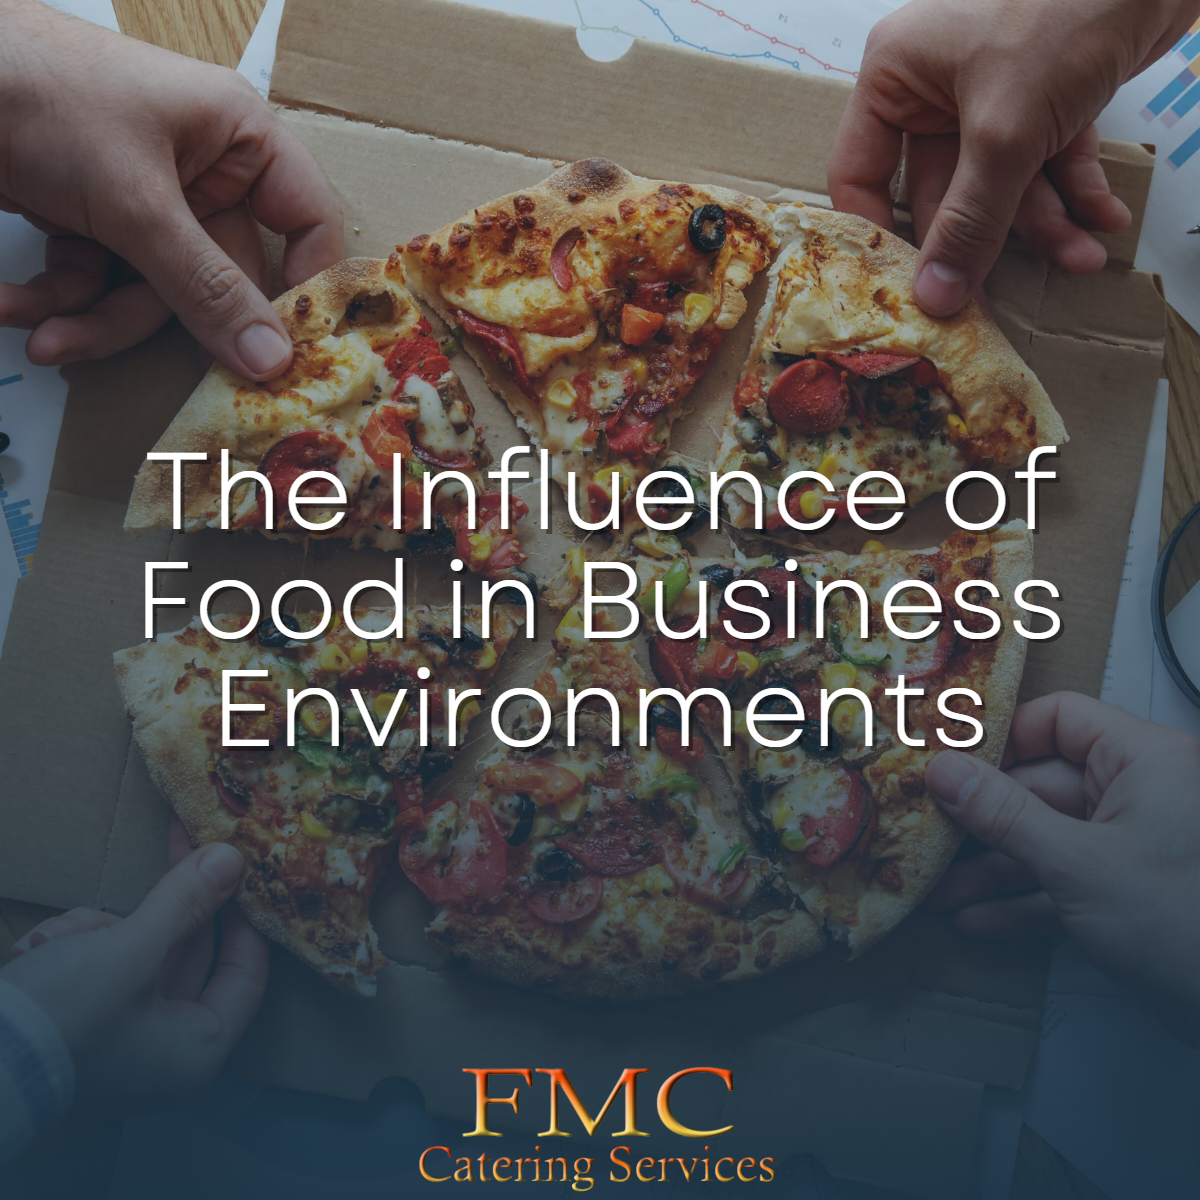 Food in Business Environments